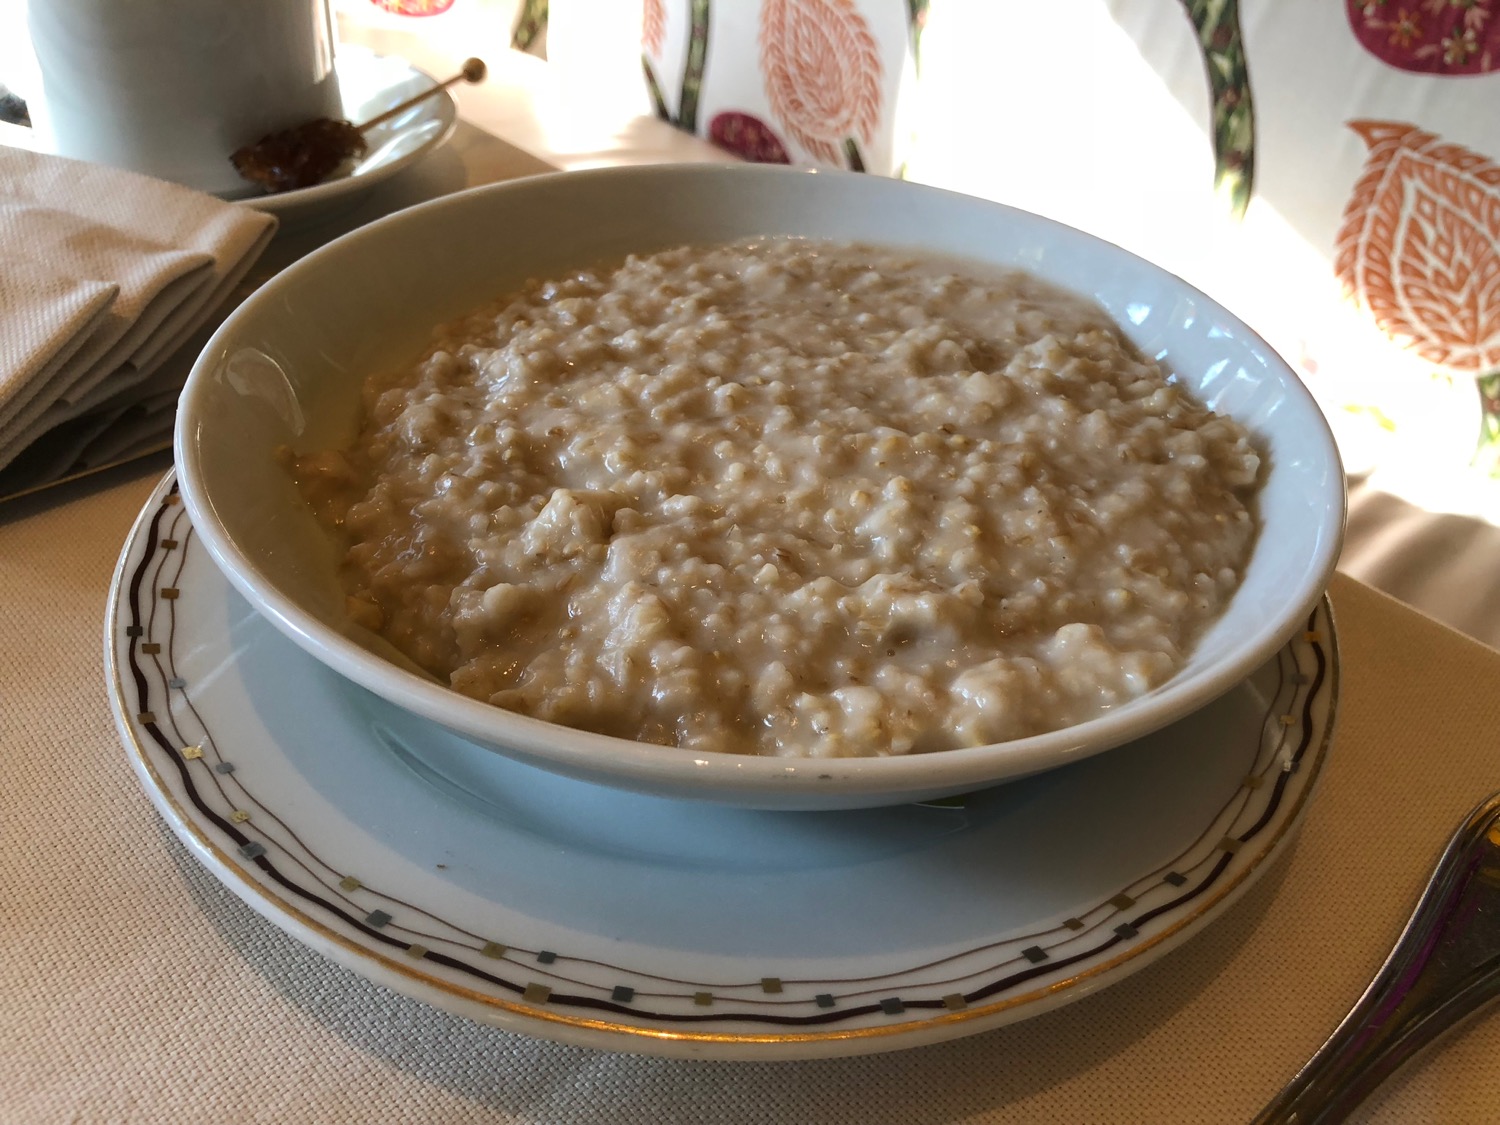 a bowl of oatmeal on a plate